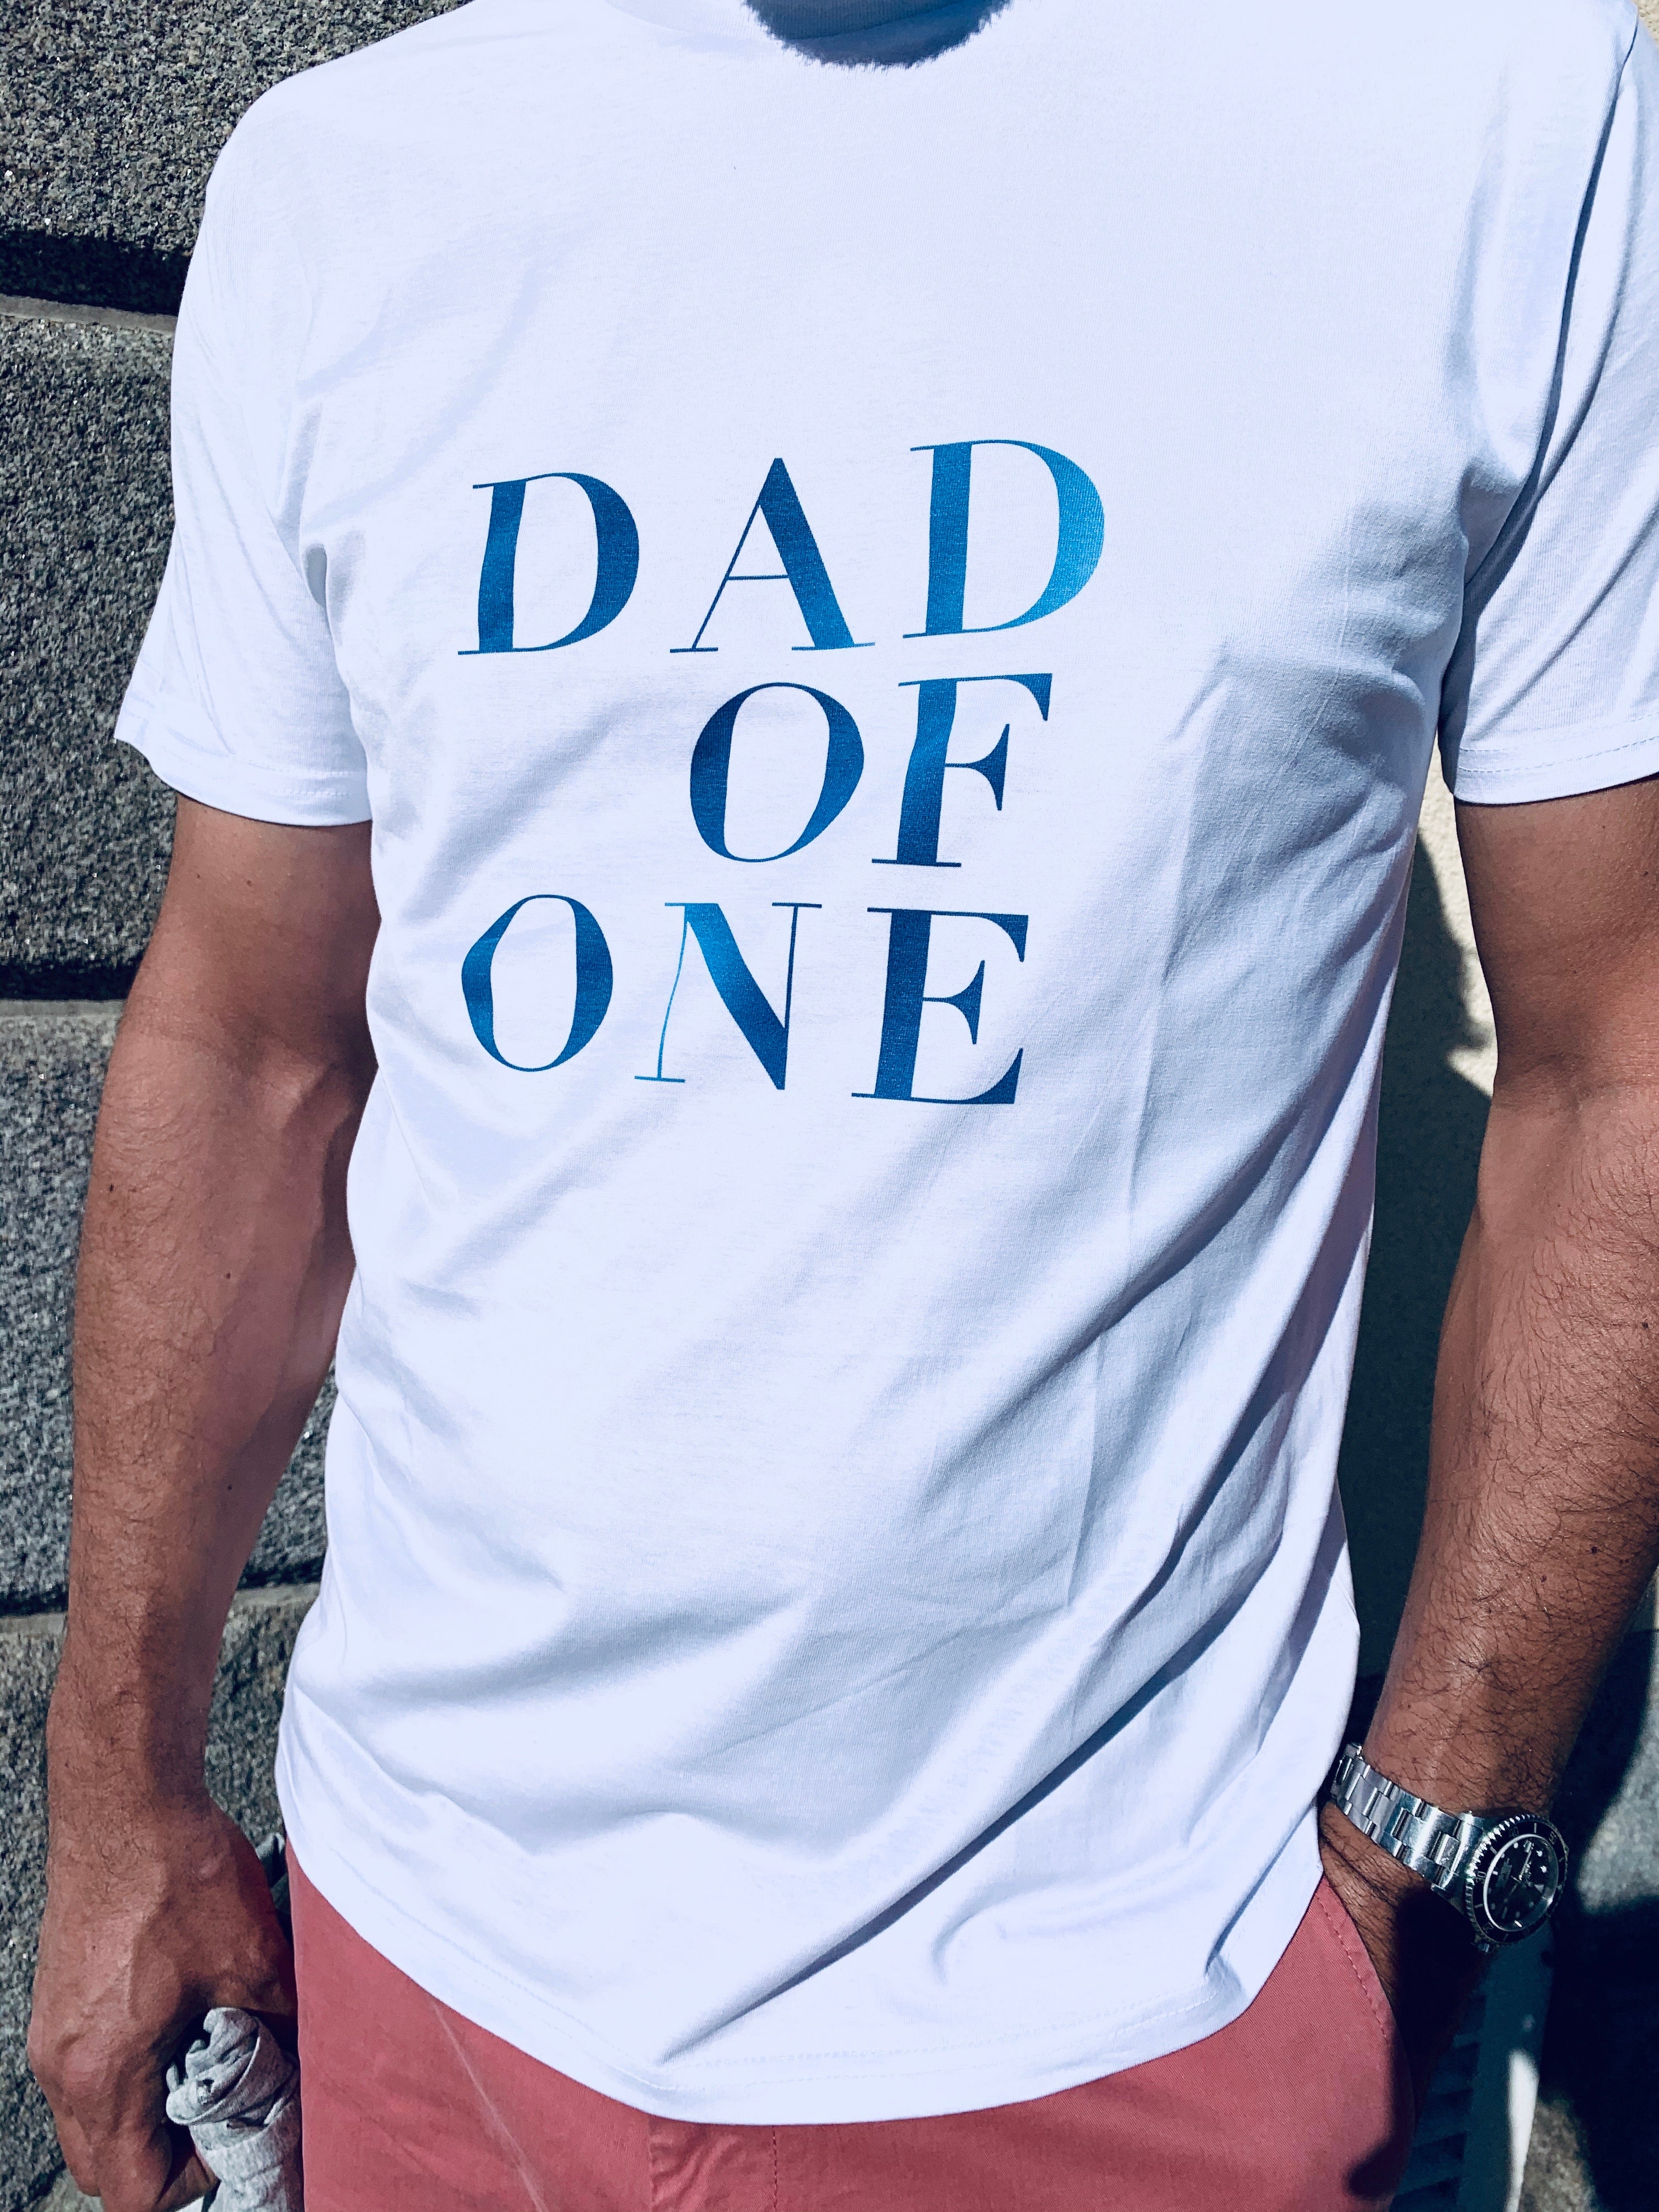 DAD OF TIE &amp; DYE BLUE Available for all DAD OF ONE, DAD OF TWO, DAD OF THREE, DAD OF FOUR, FIVE, SIX, TWINS, DAD TO BE